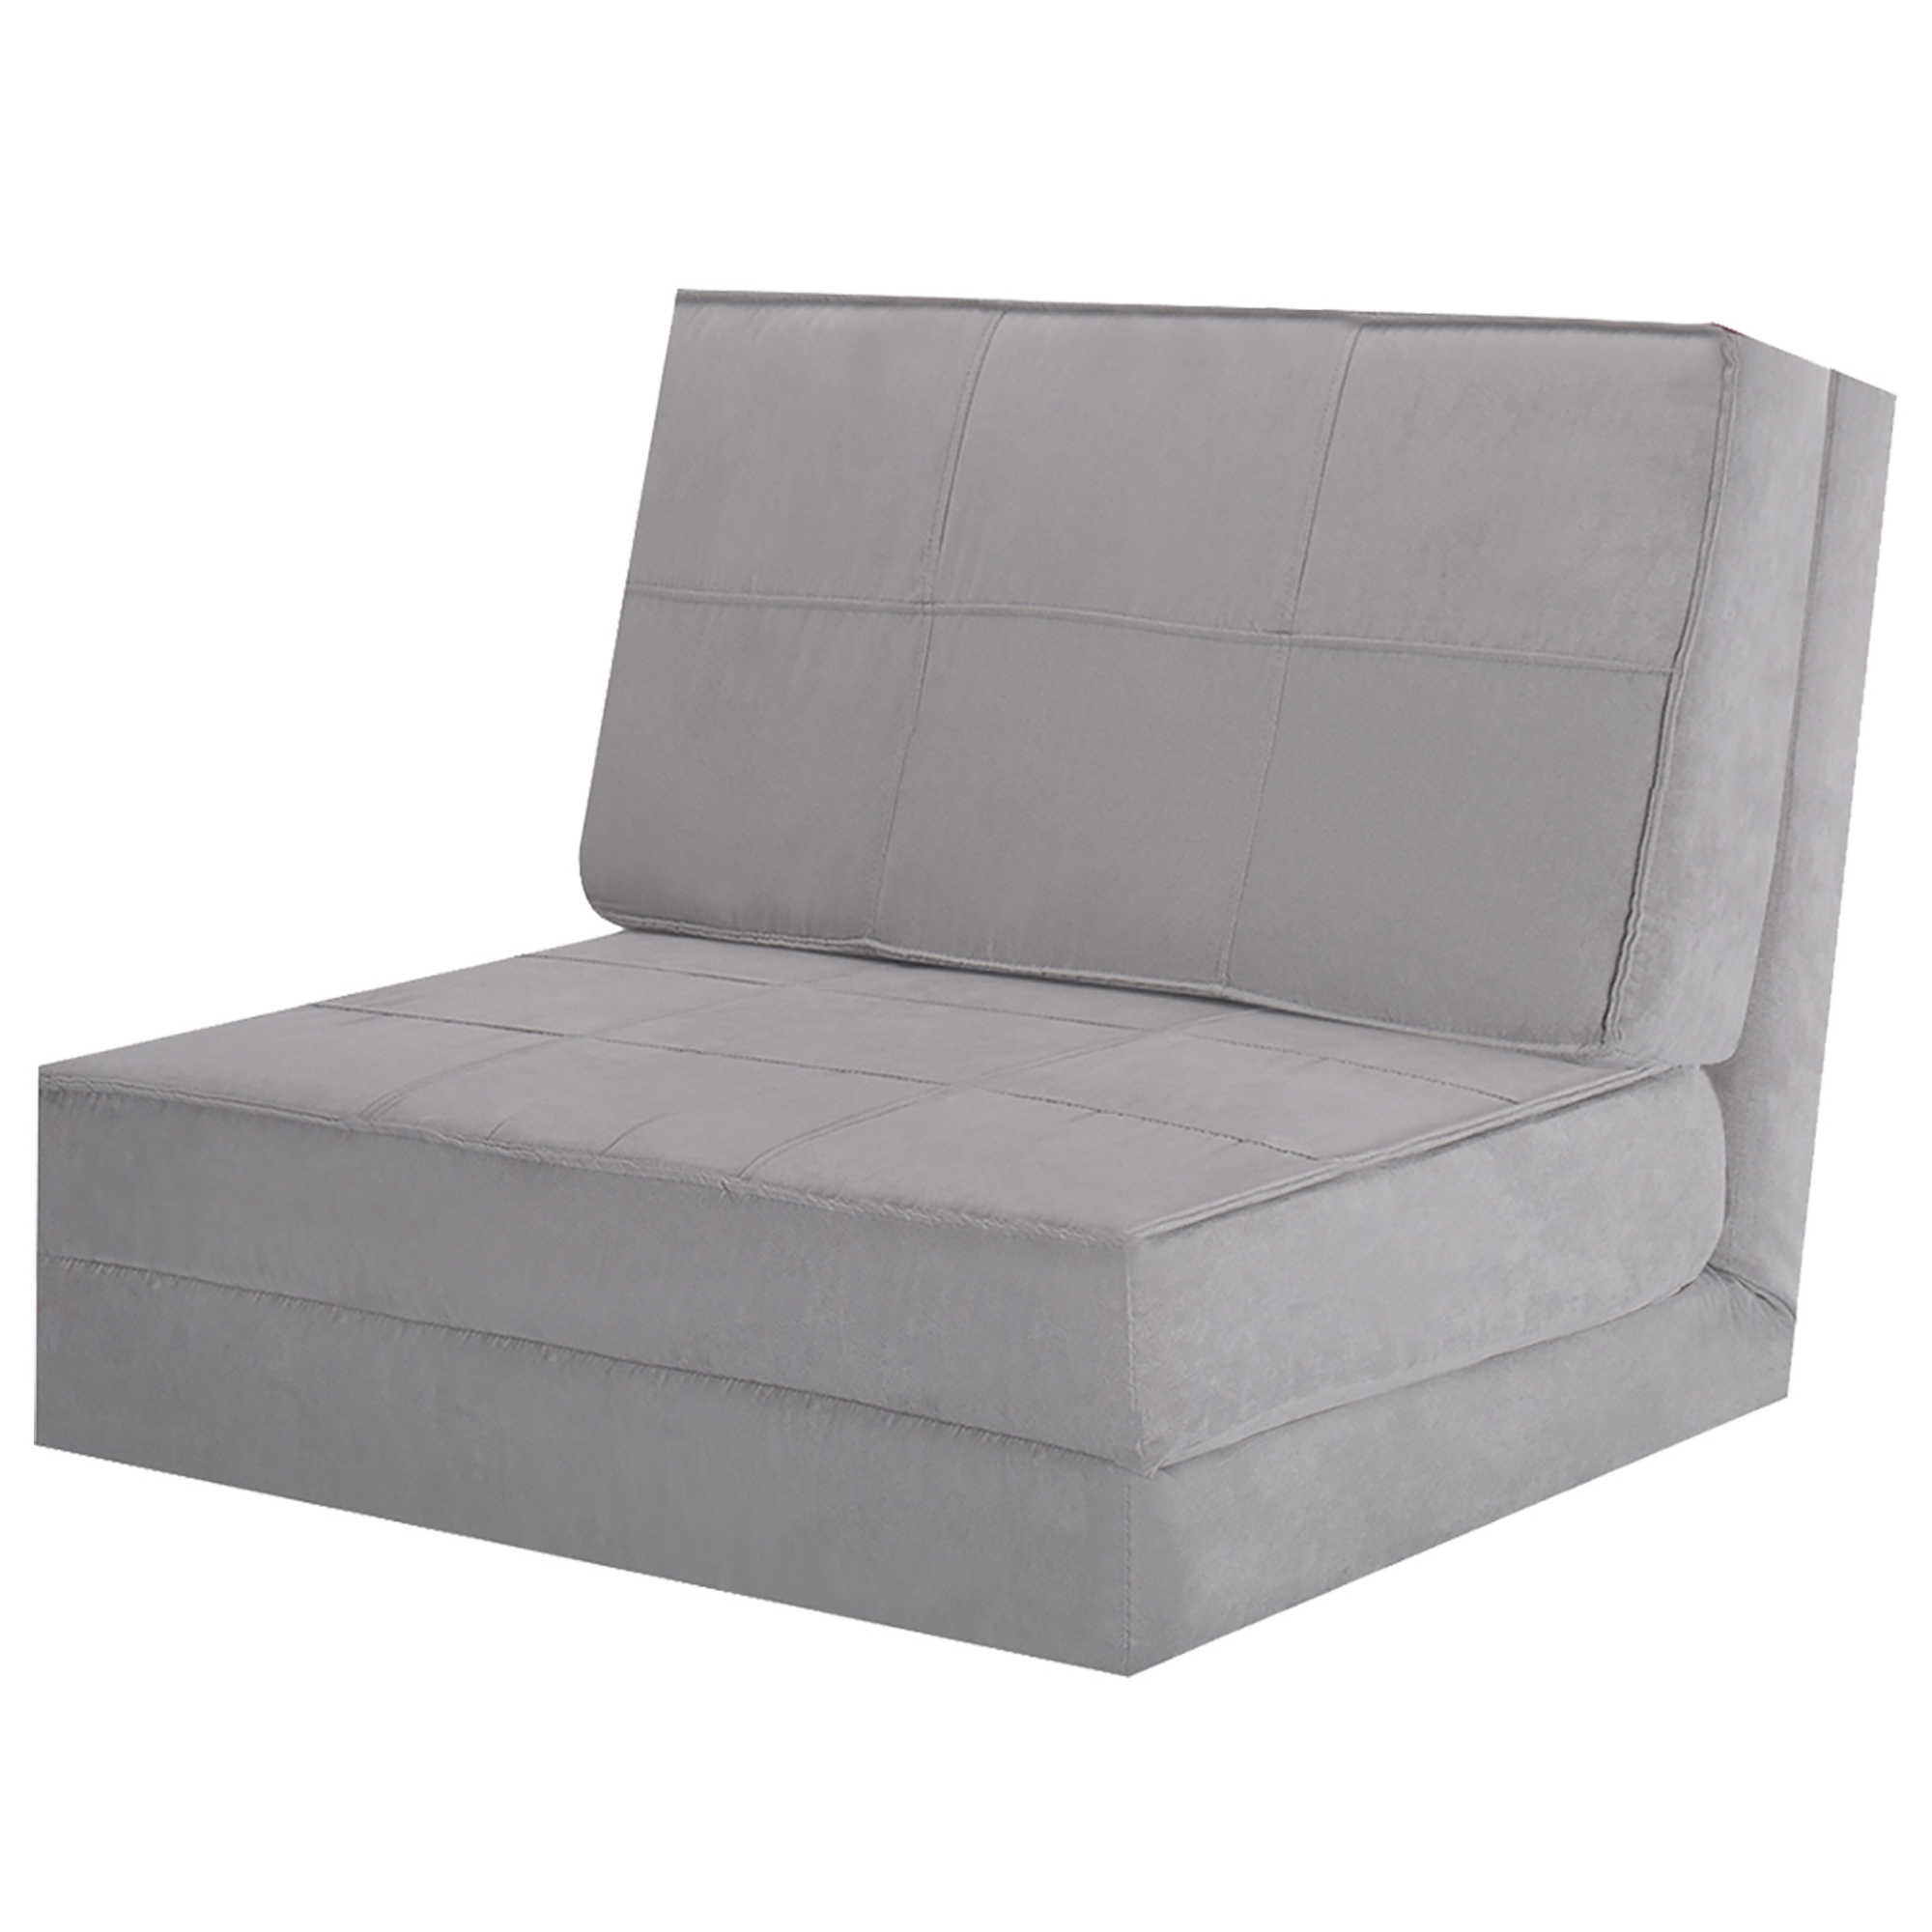 Costway Convertible Fold Down Chair Flip Out Lounger Sleeper Bed Couch Grey - image 1 of 10